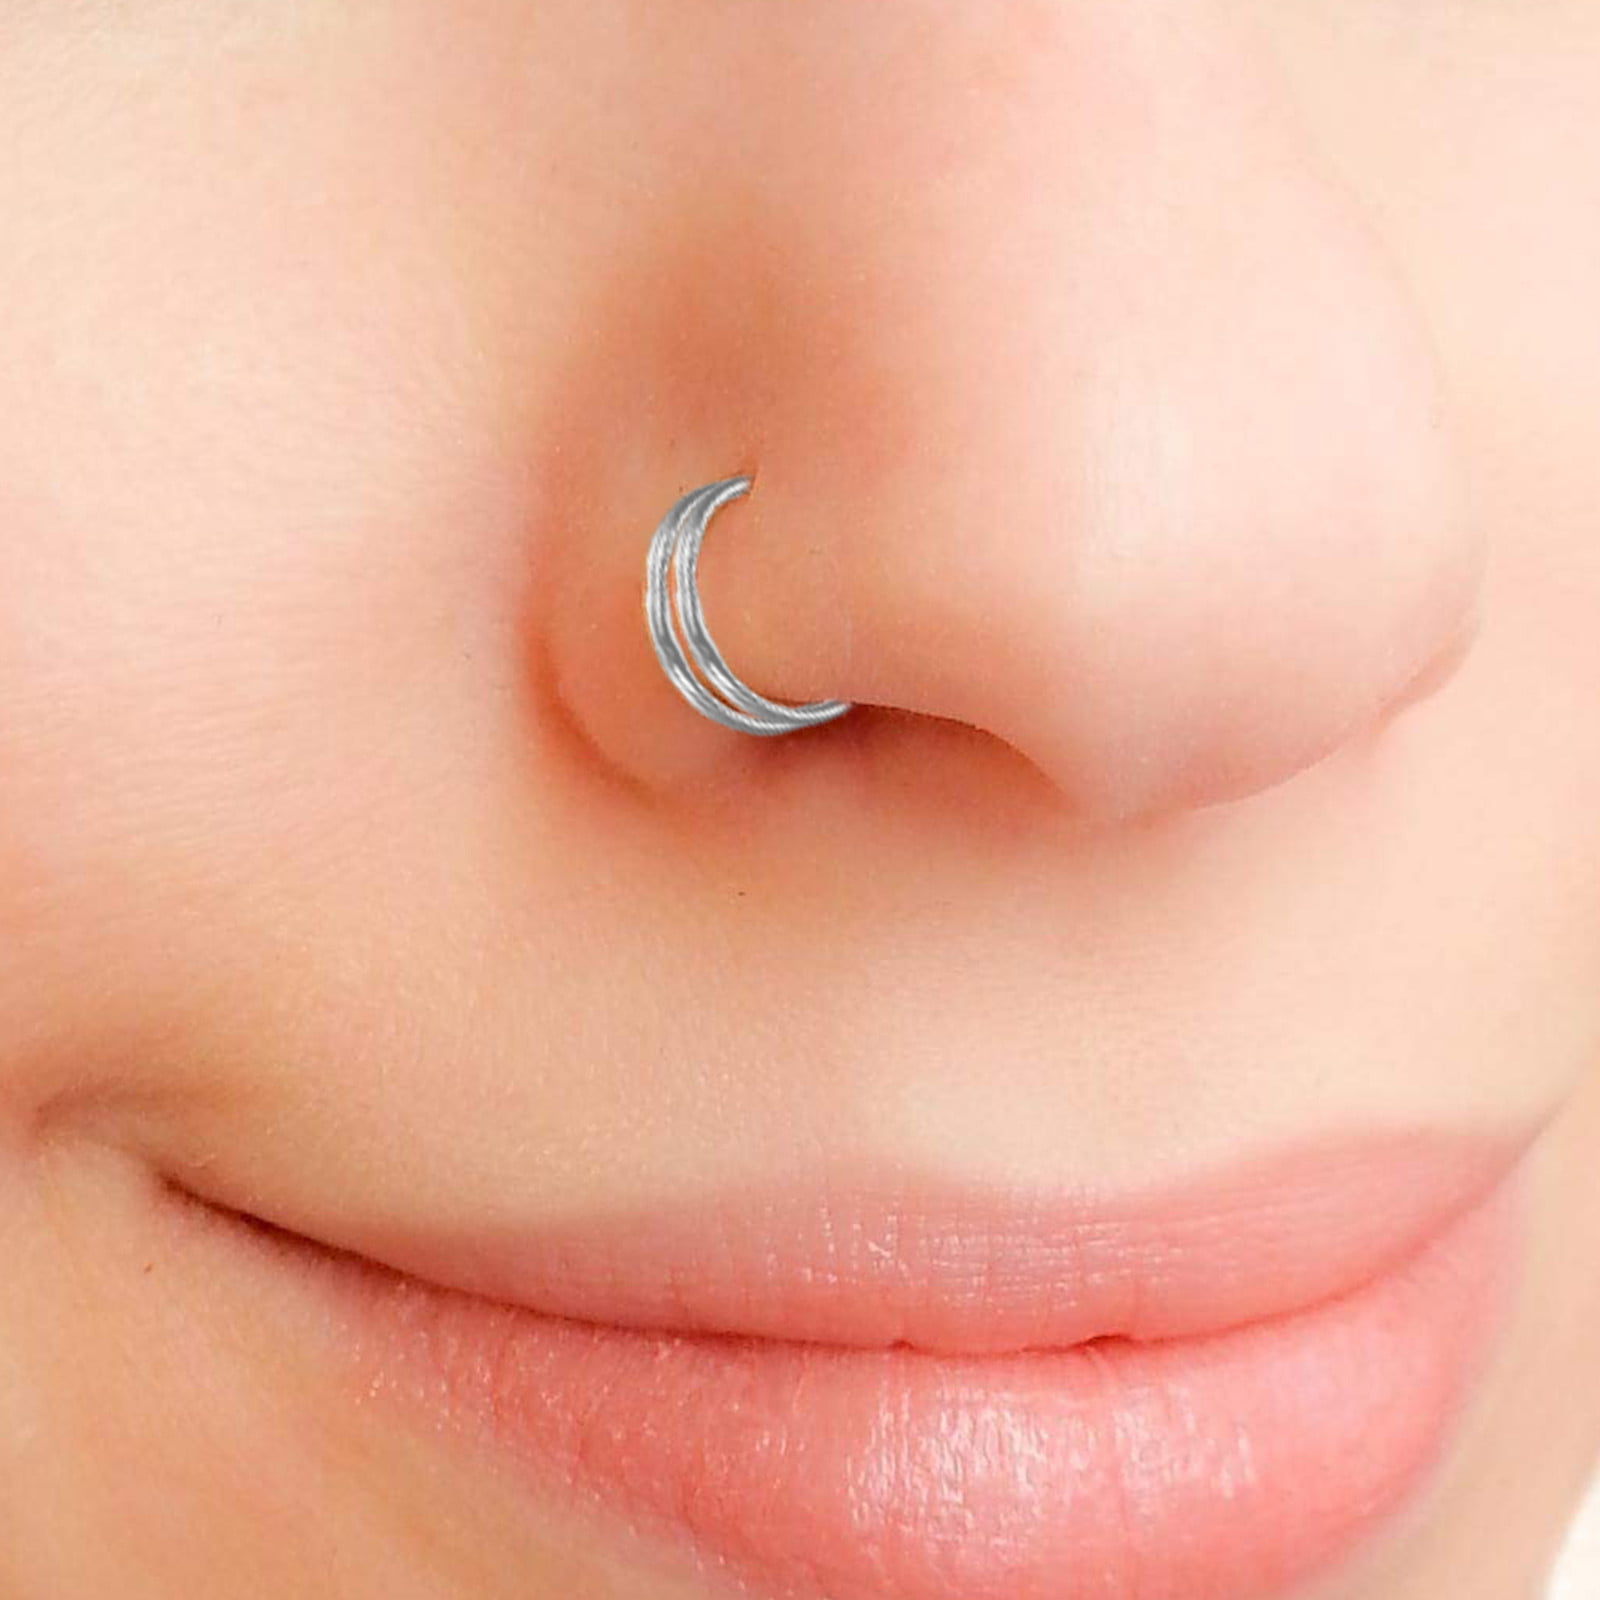 Buy Nose Ring 22g Double Nose Ring Single Pierced Nose Hoop Piercing Double  Nose Ring Single Pierce Double Hoop Twisted Piercing Hoop Online in India -  Etsy